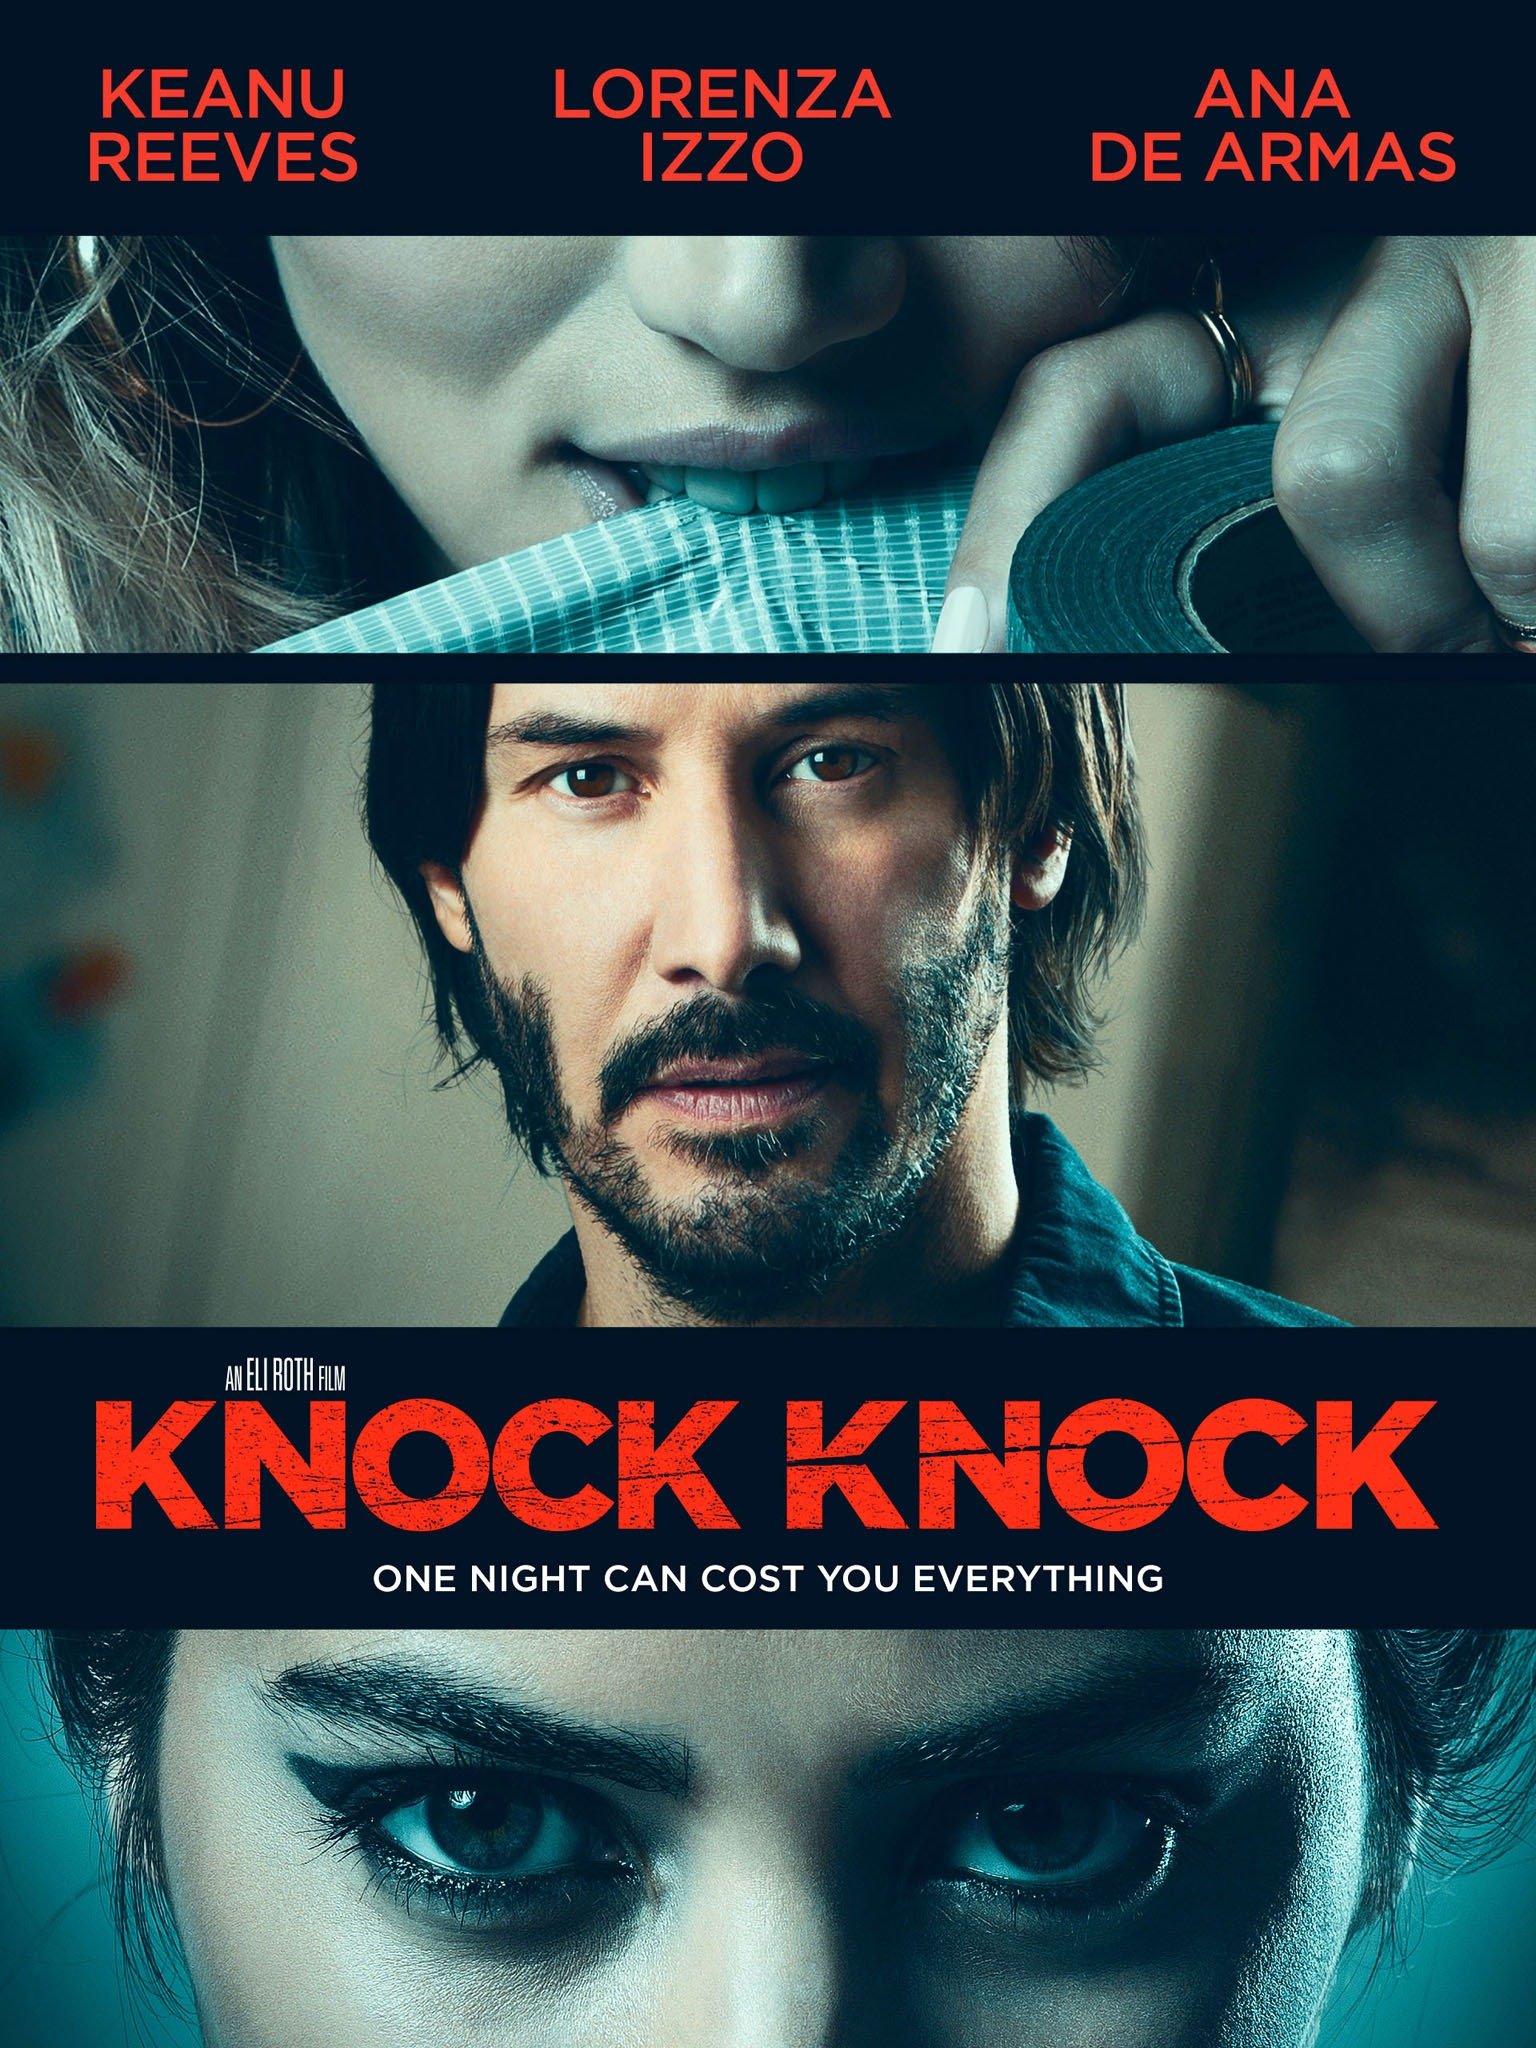 Knock Knock Trailer 1 Trailers And Videos Rotten Tomatoes 